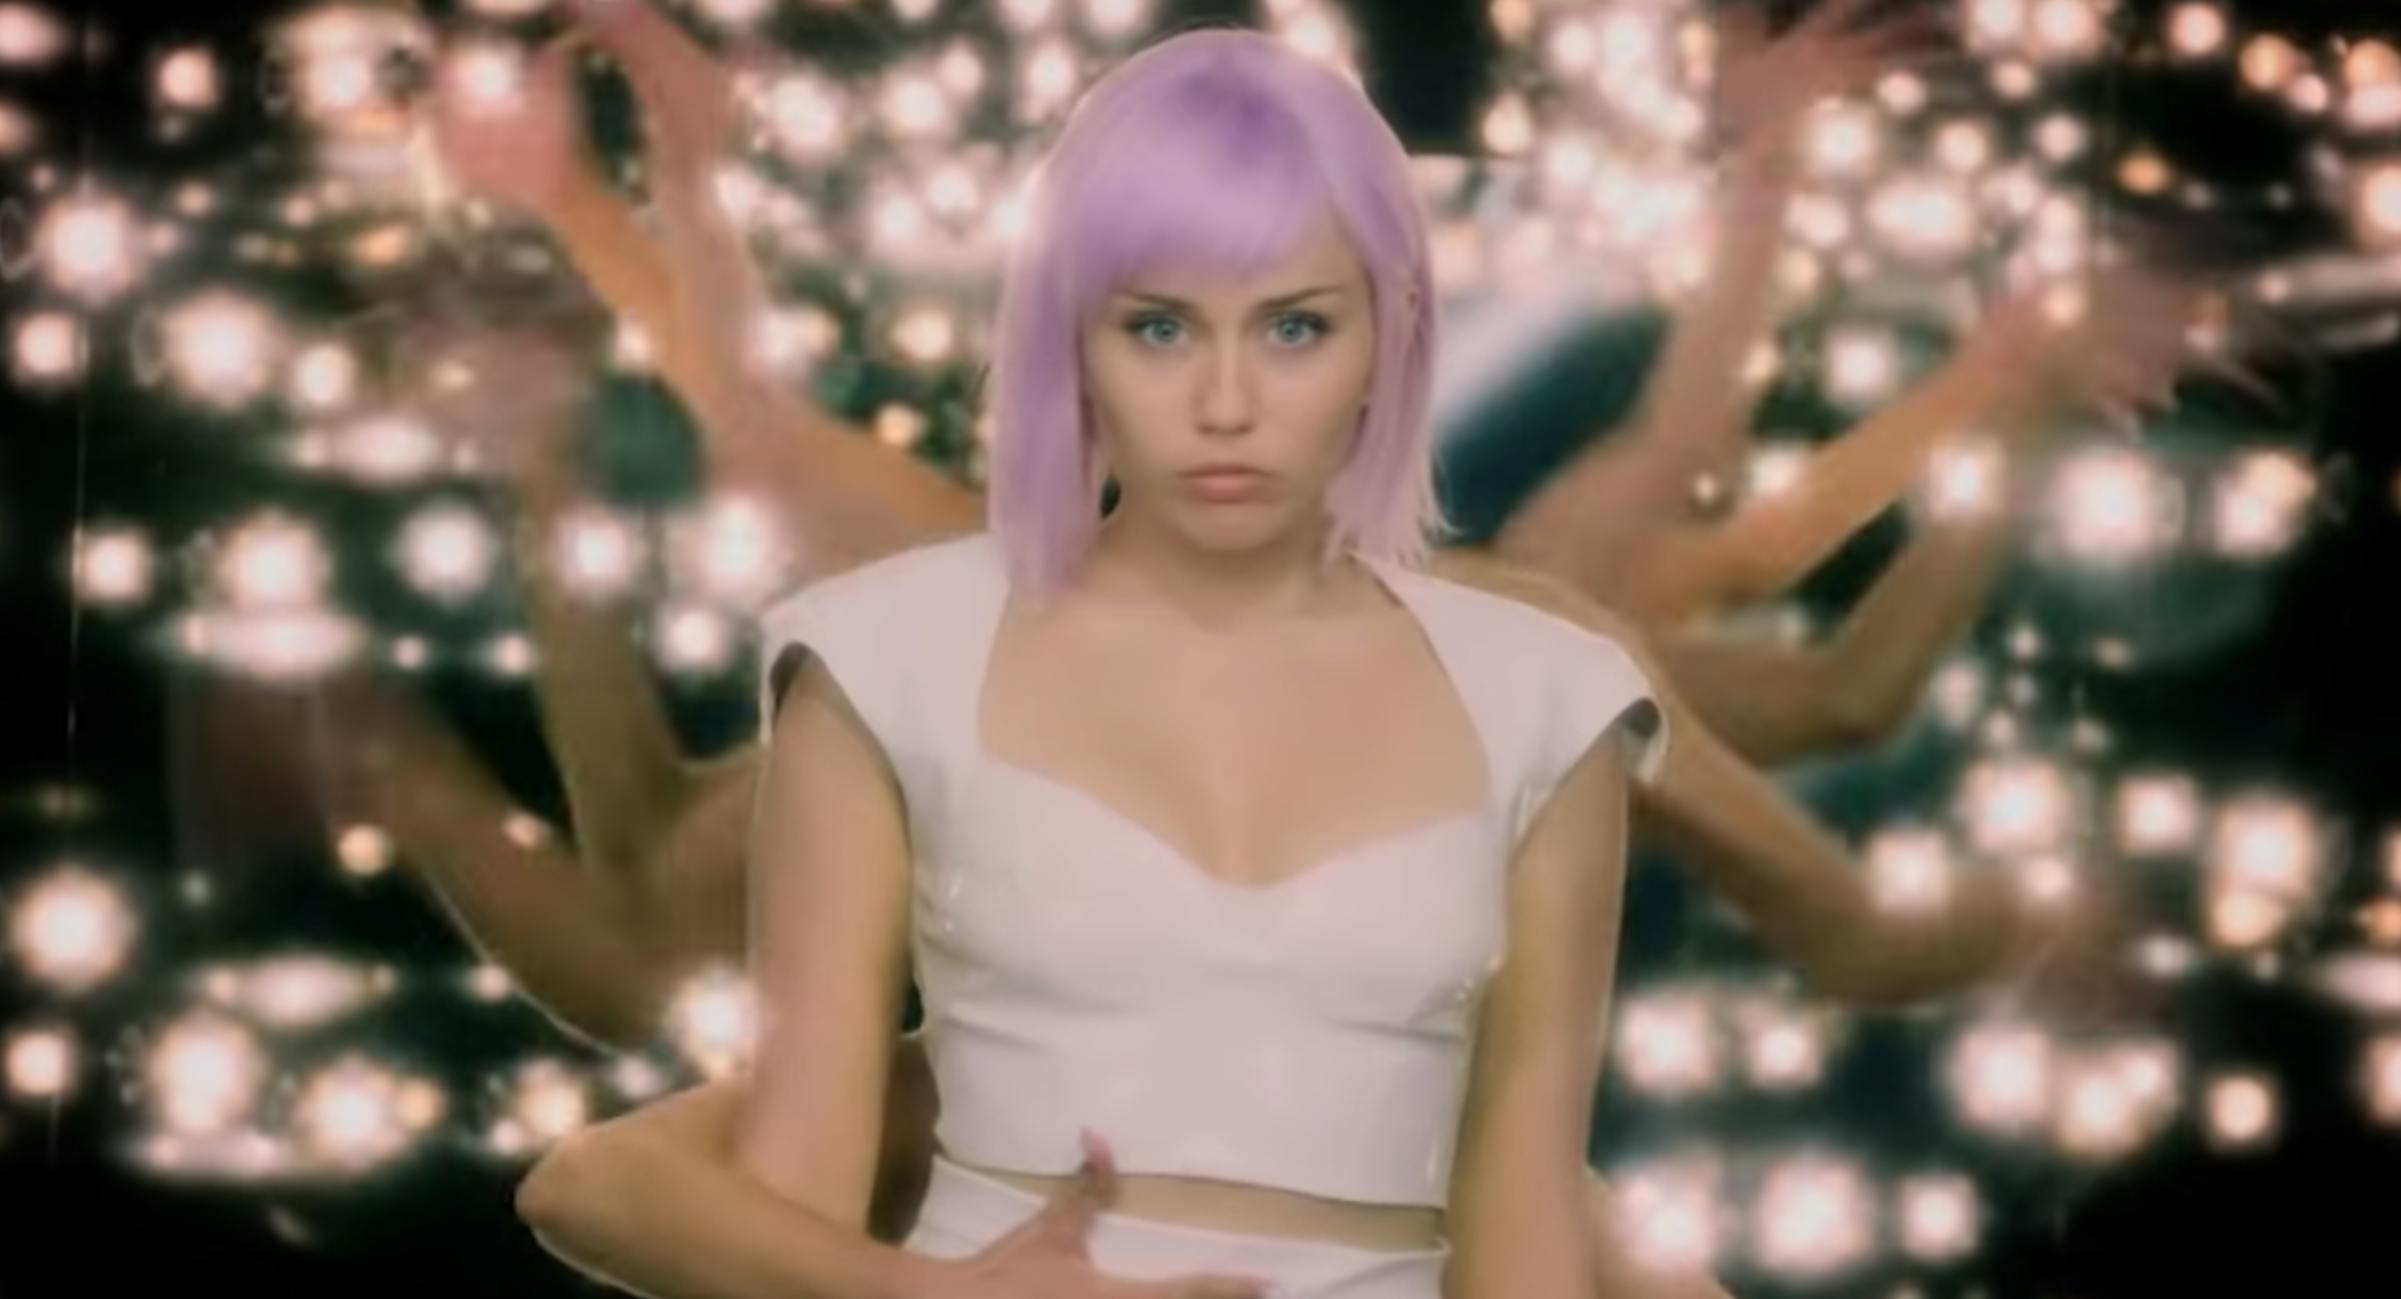 Watch The Full Music Video For Miley Cyrus' Head Like A Hole Cover